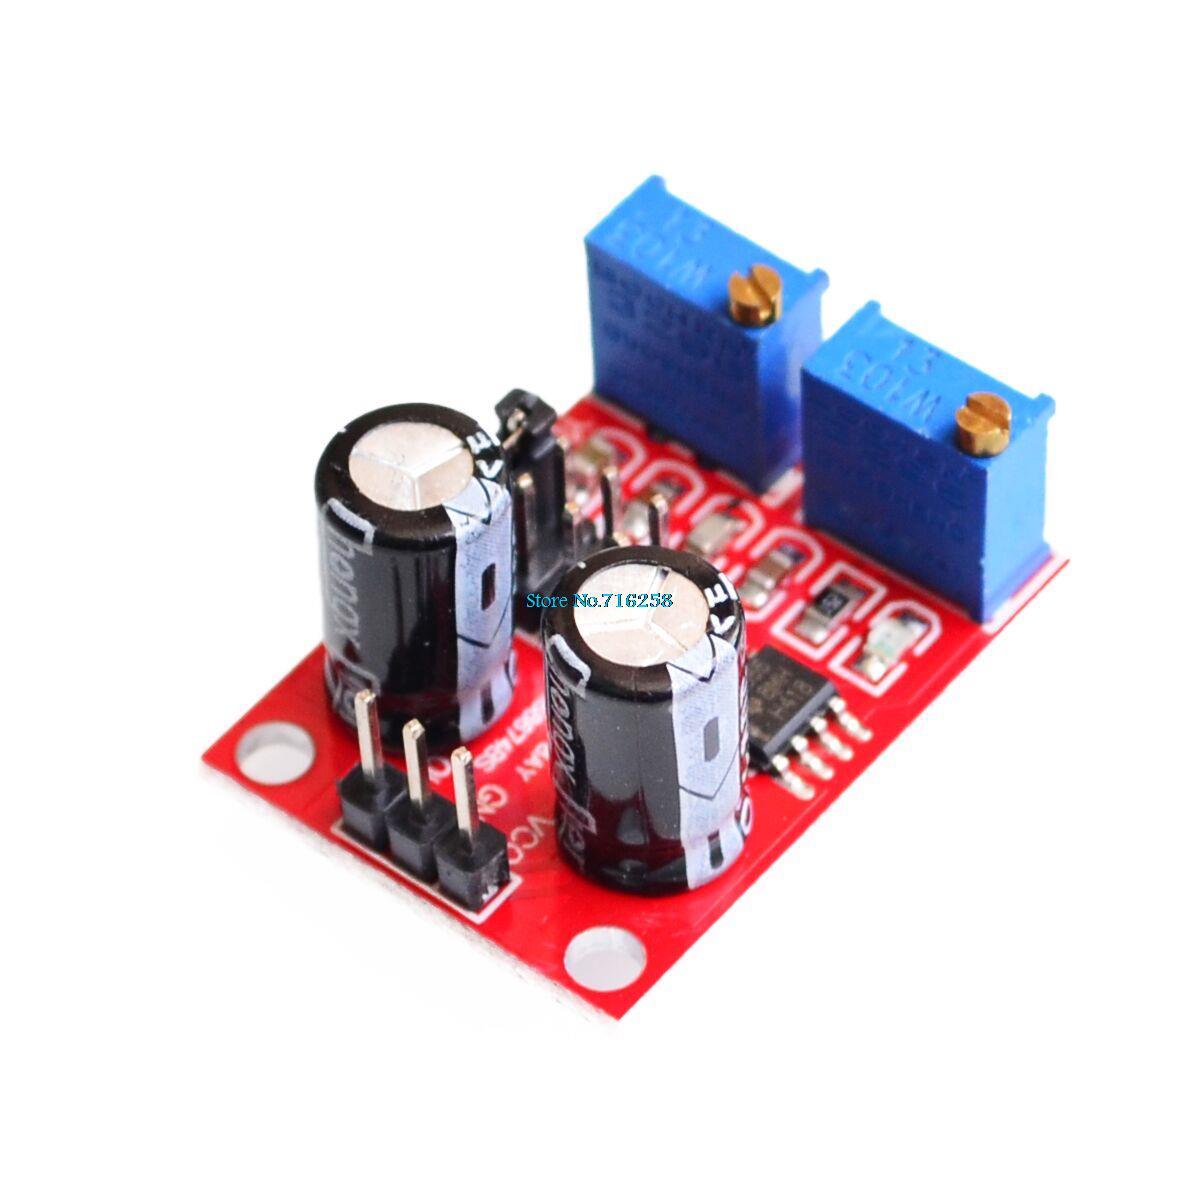 5pcs/lot  NE555 pulse frequency, duty cycle adjustable module,square/rectangular wave signal generator,stepping motor driver